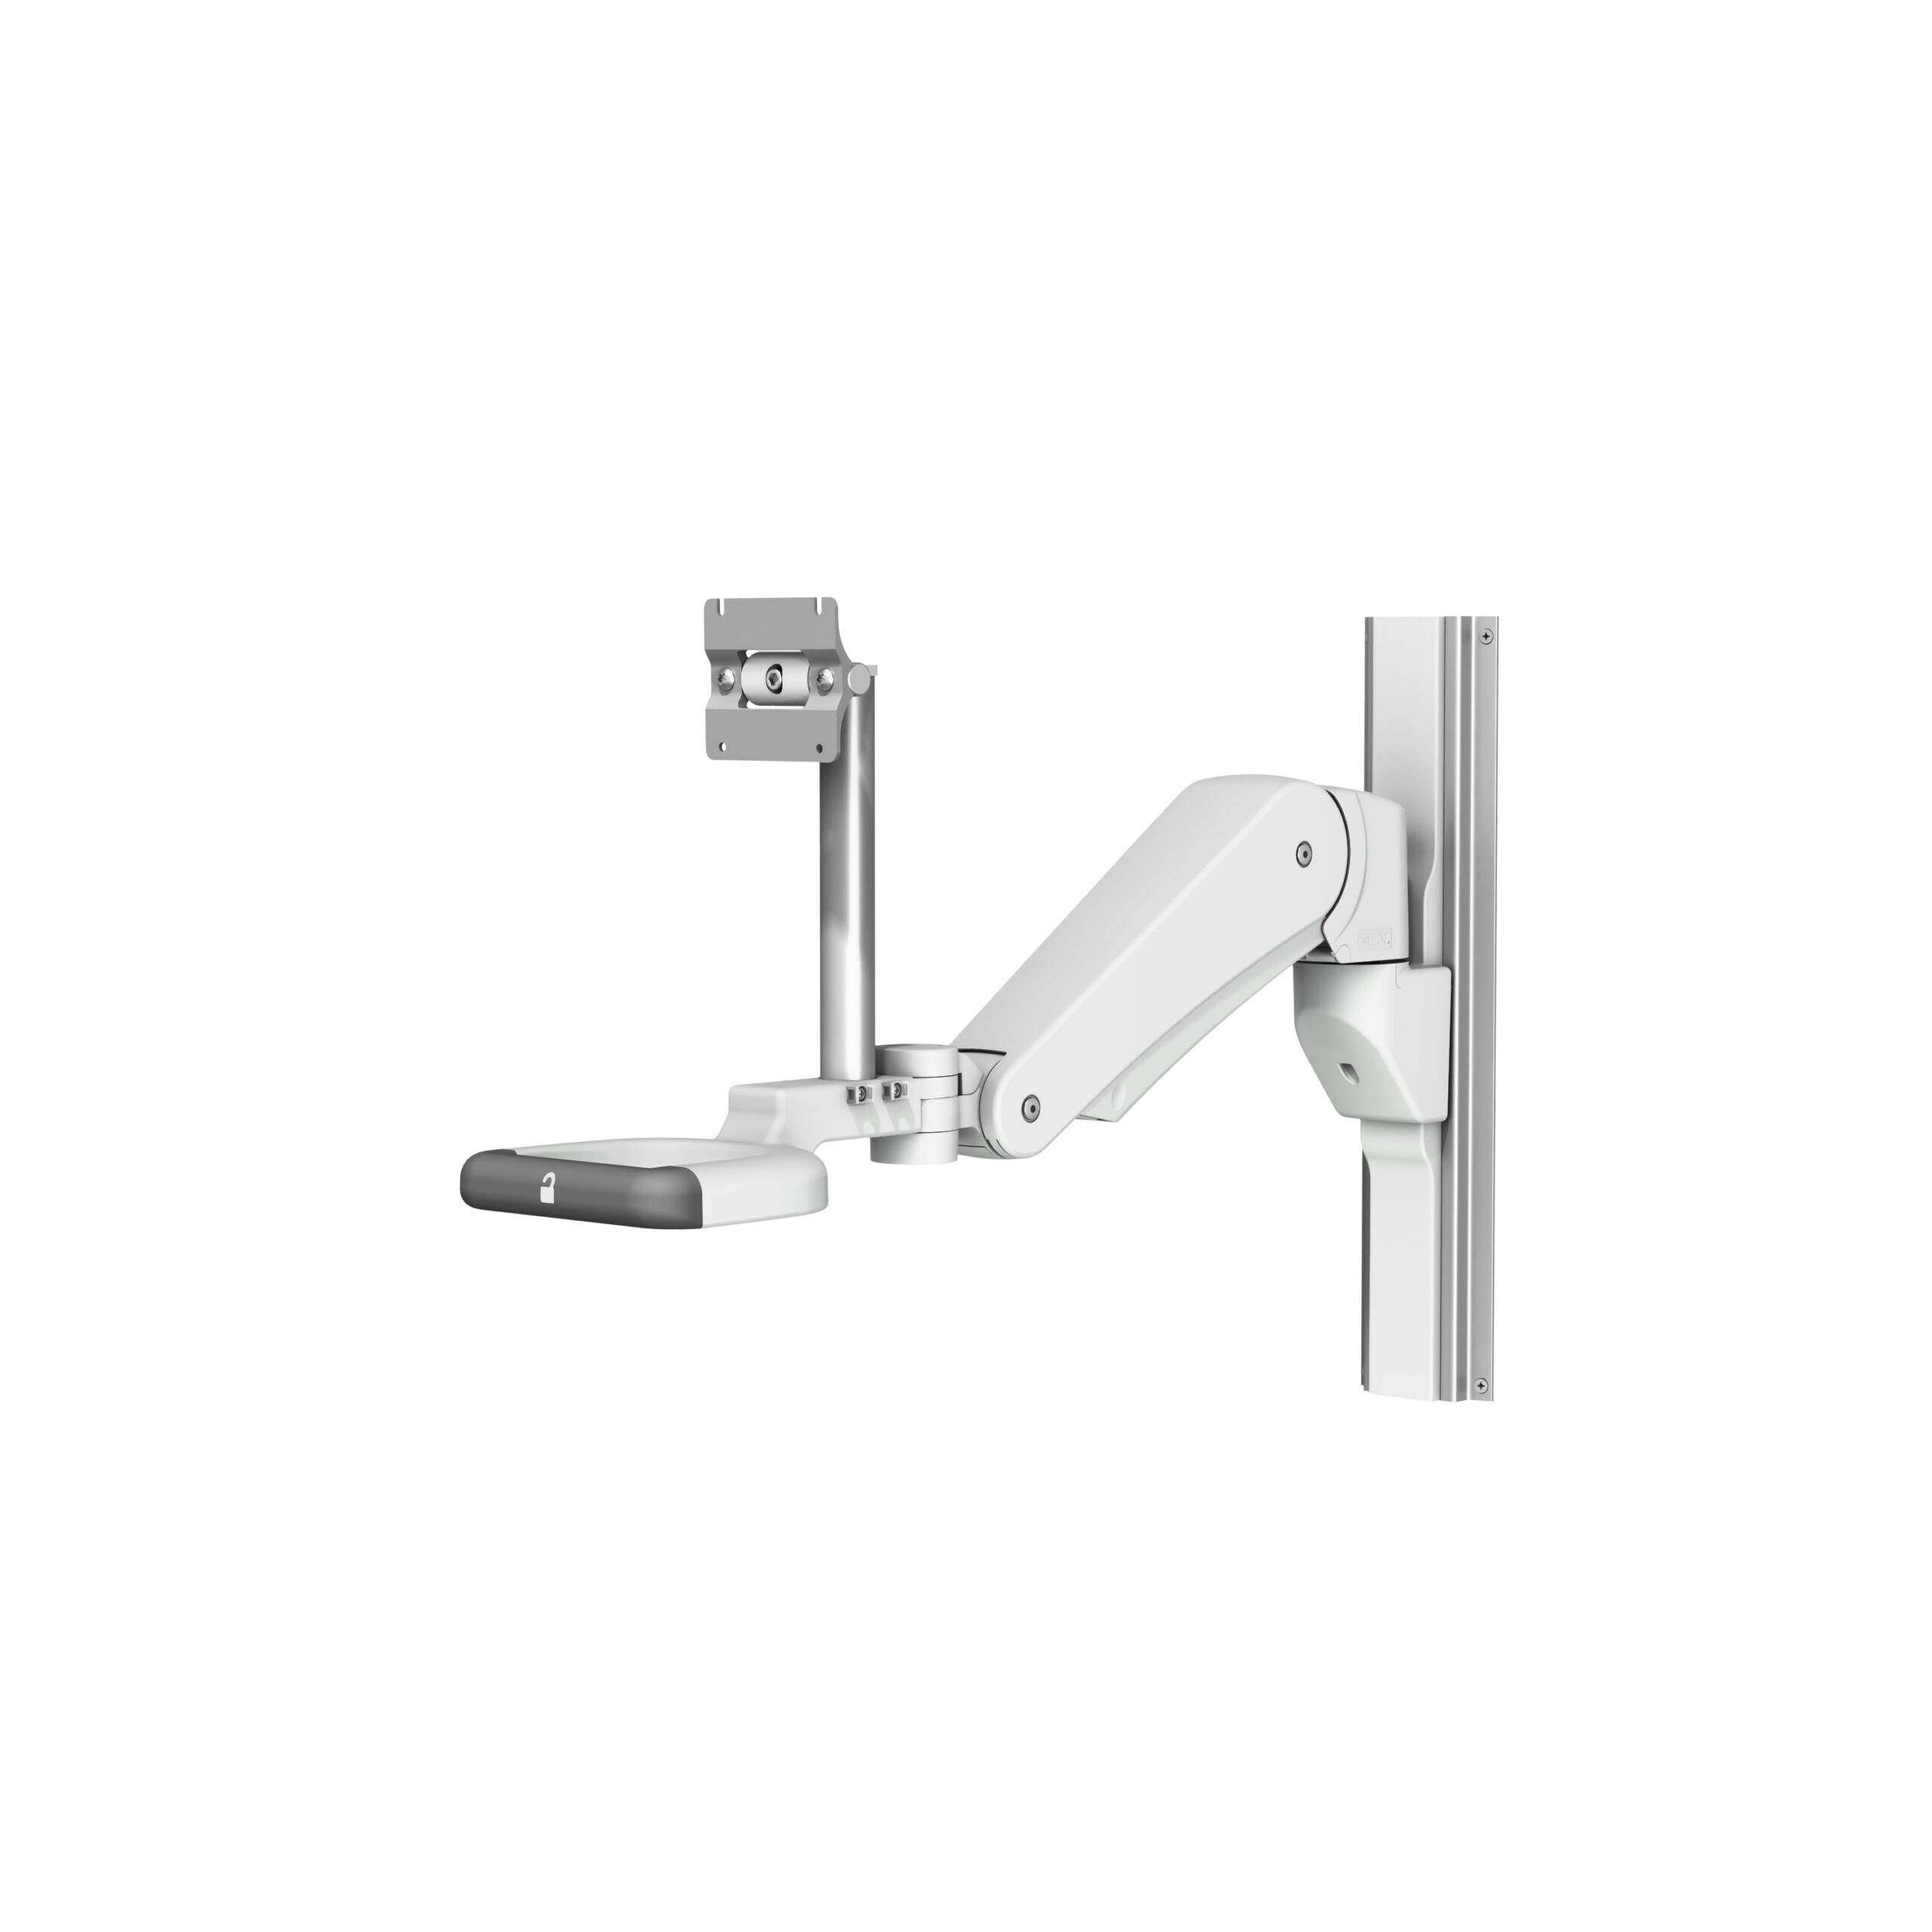 WS-0012-73 - WS-0012-73 – VHM-PL (Locking) Variable Height Arm with 9″ / 22.9 cm Riser and VESA Mounting Plate